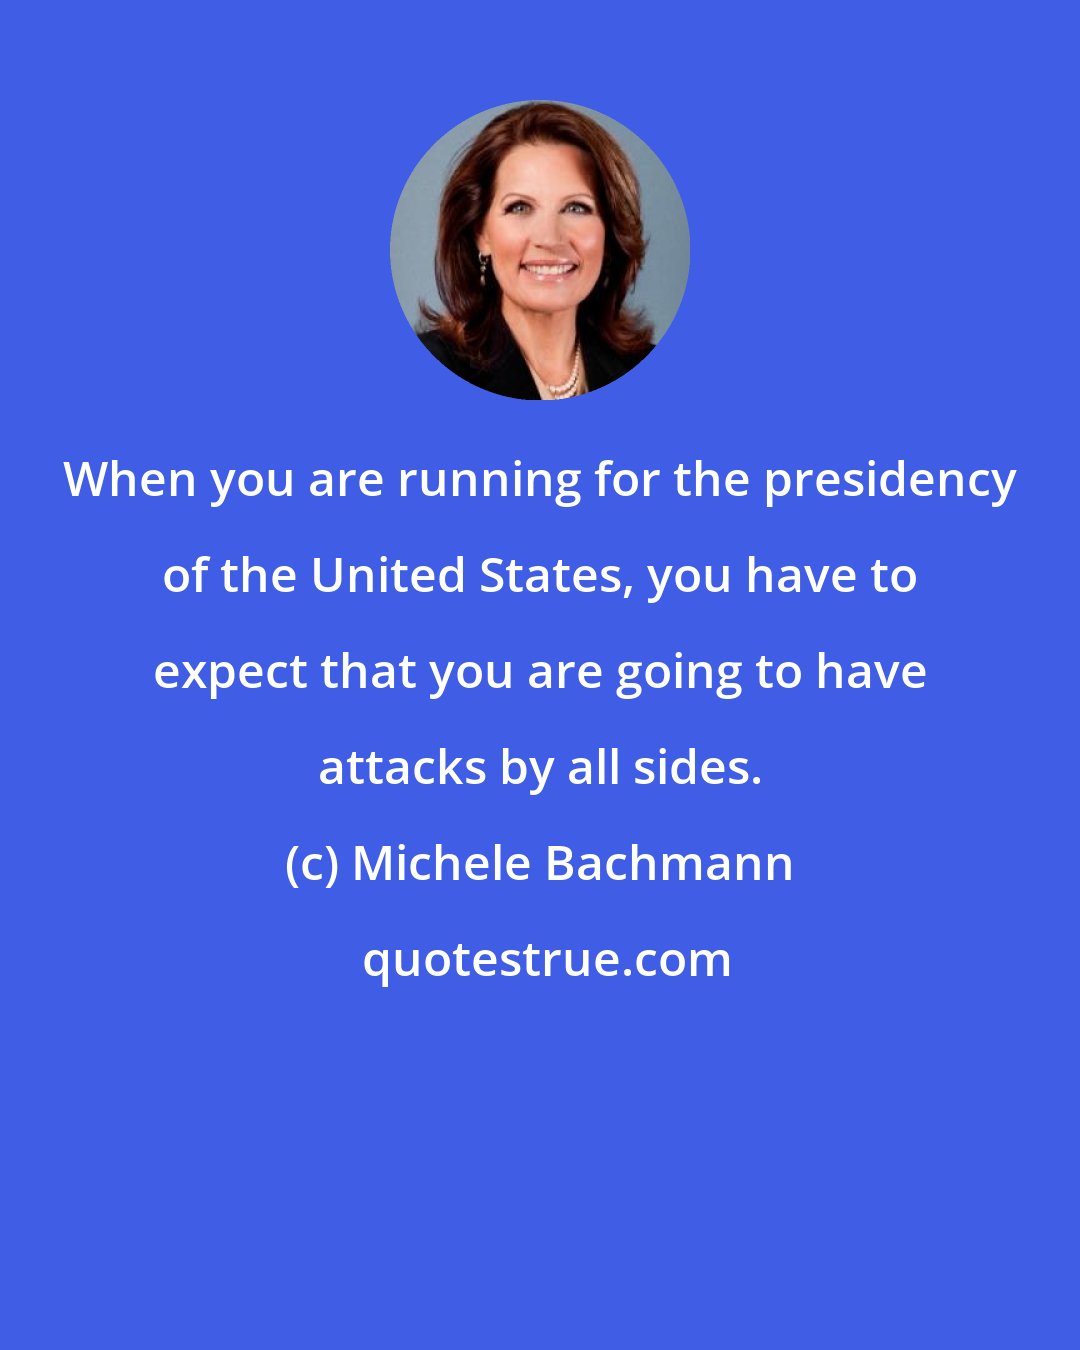 Michele Bachmann: When you are running for the presidency of the United States, you have to expect that you are going to have attacks by all sides.